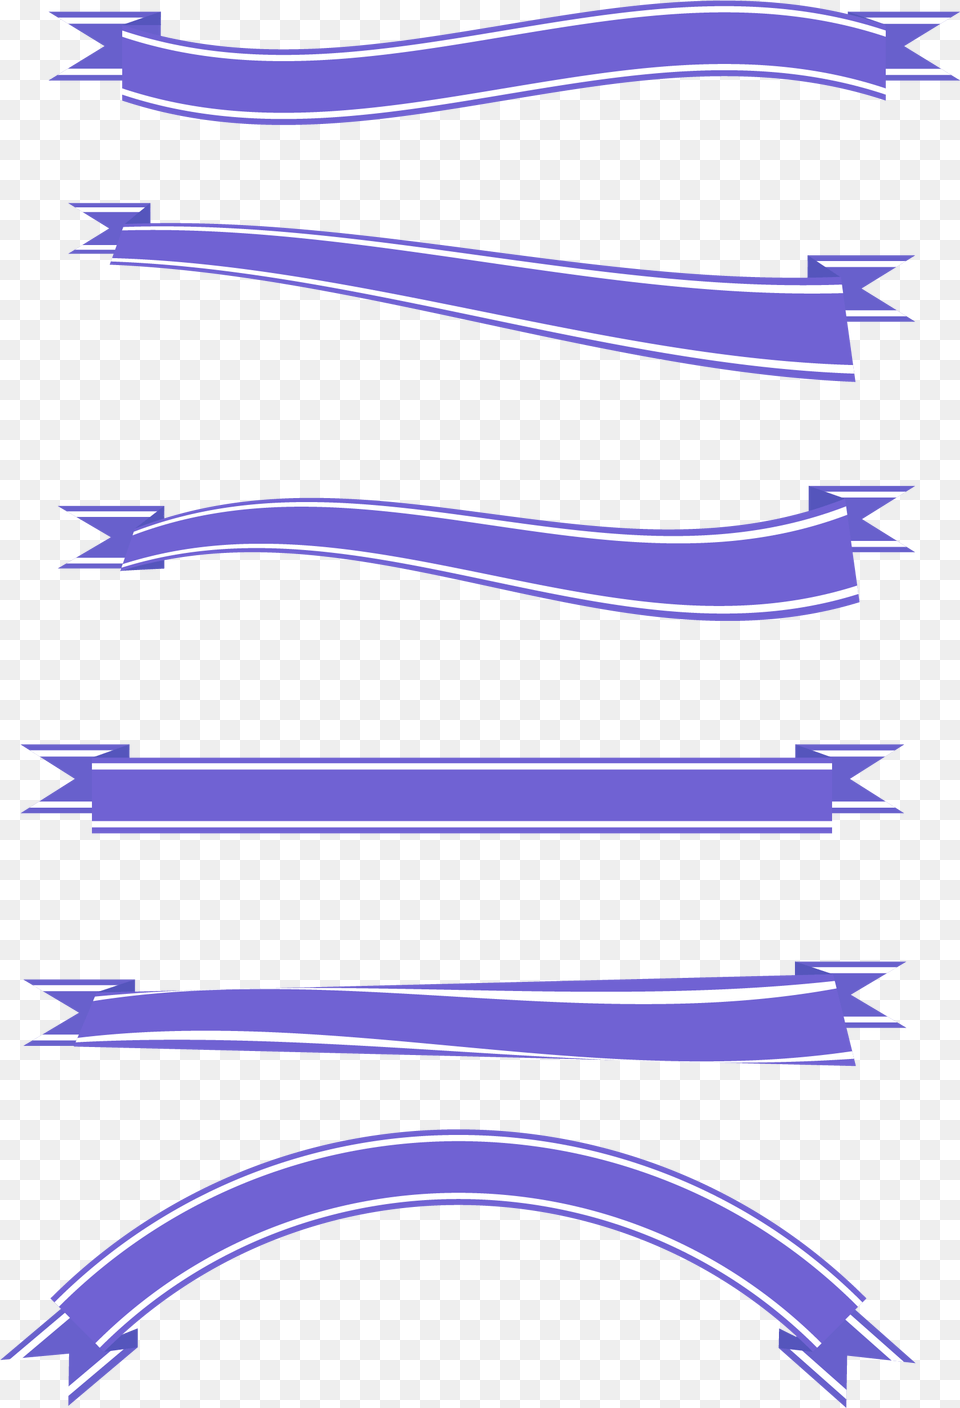 Blue Color Ribbon Border And Vector Image Weapon, Light, Sword, Cutlery, Fork Free Png Download